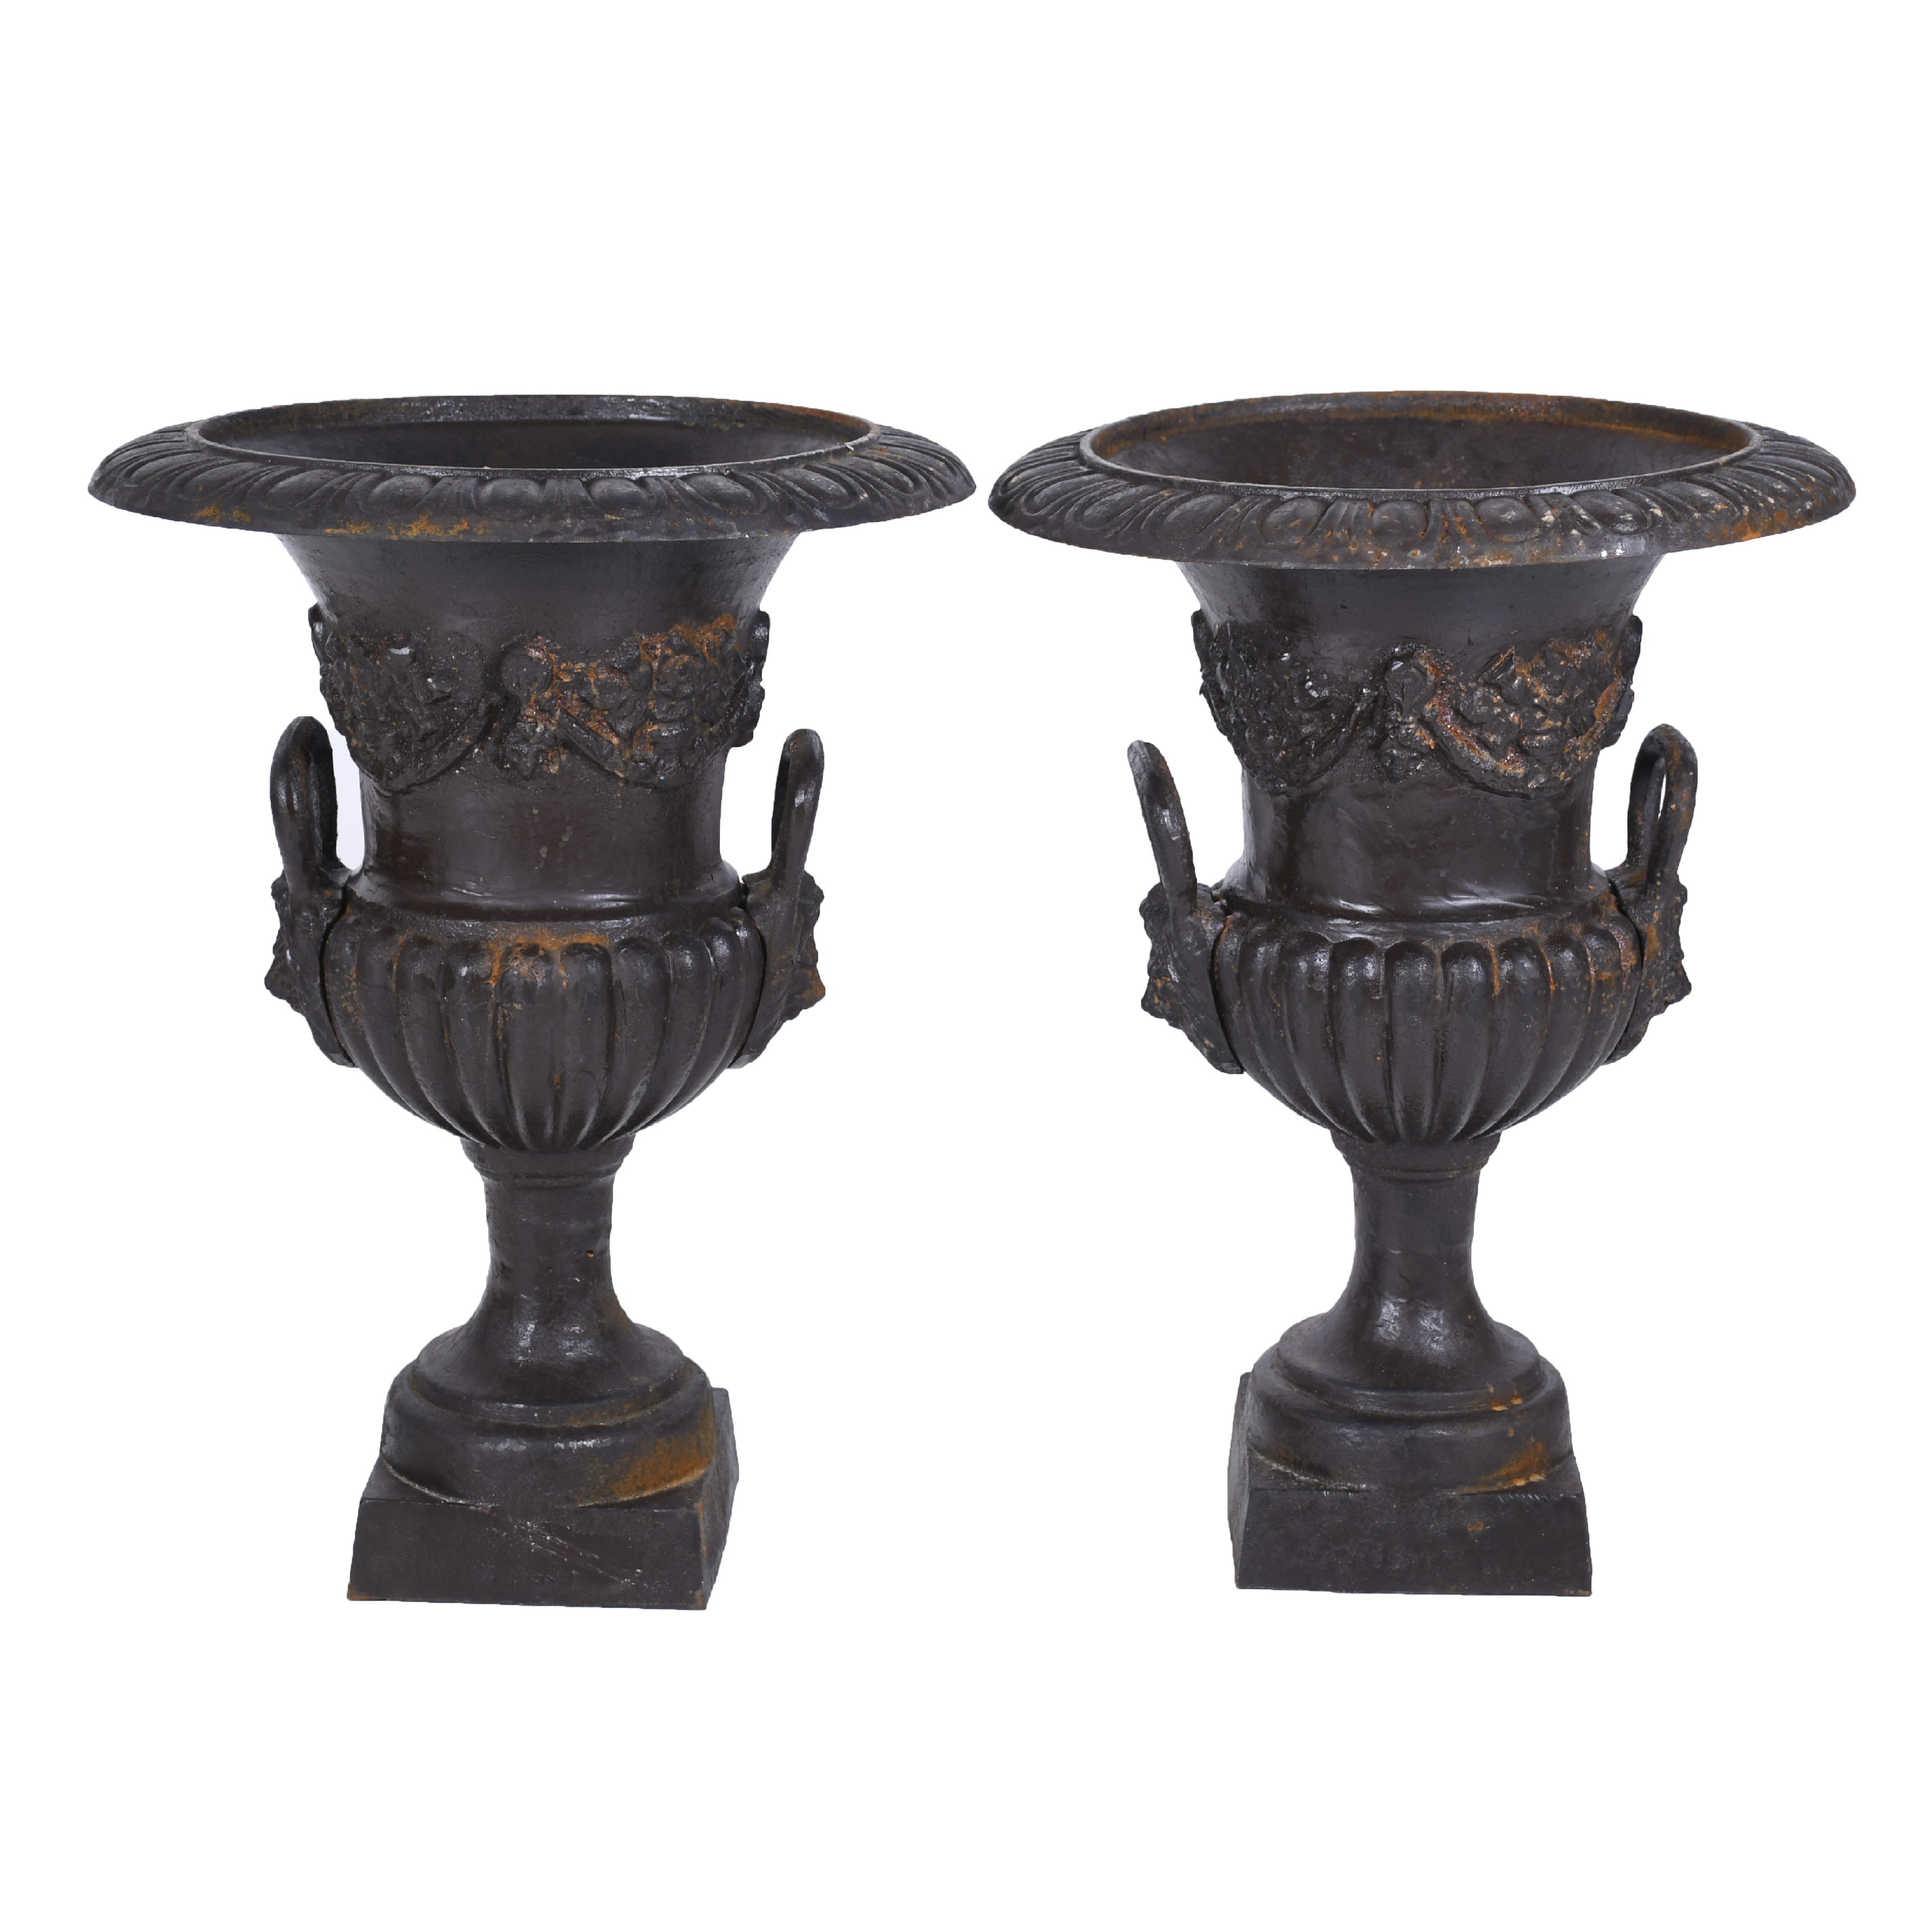 PAIR OF LARGE MEDICI-LIKE GARDEN KRATERS, 20TH CENTURY.